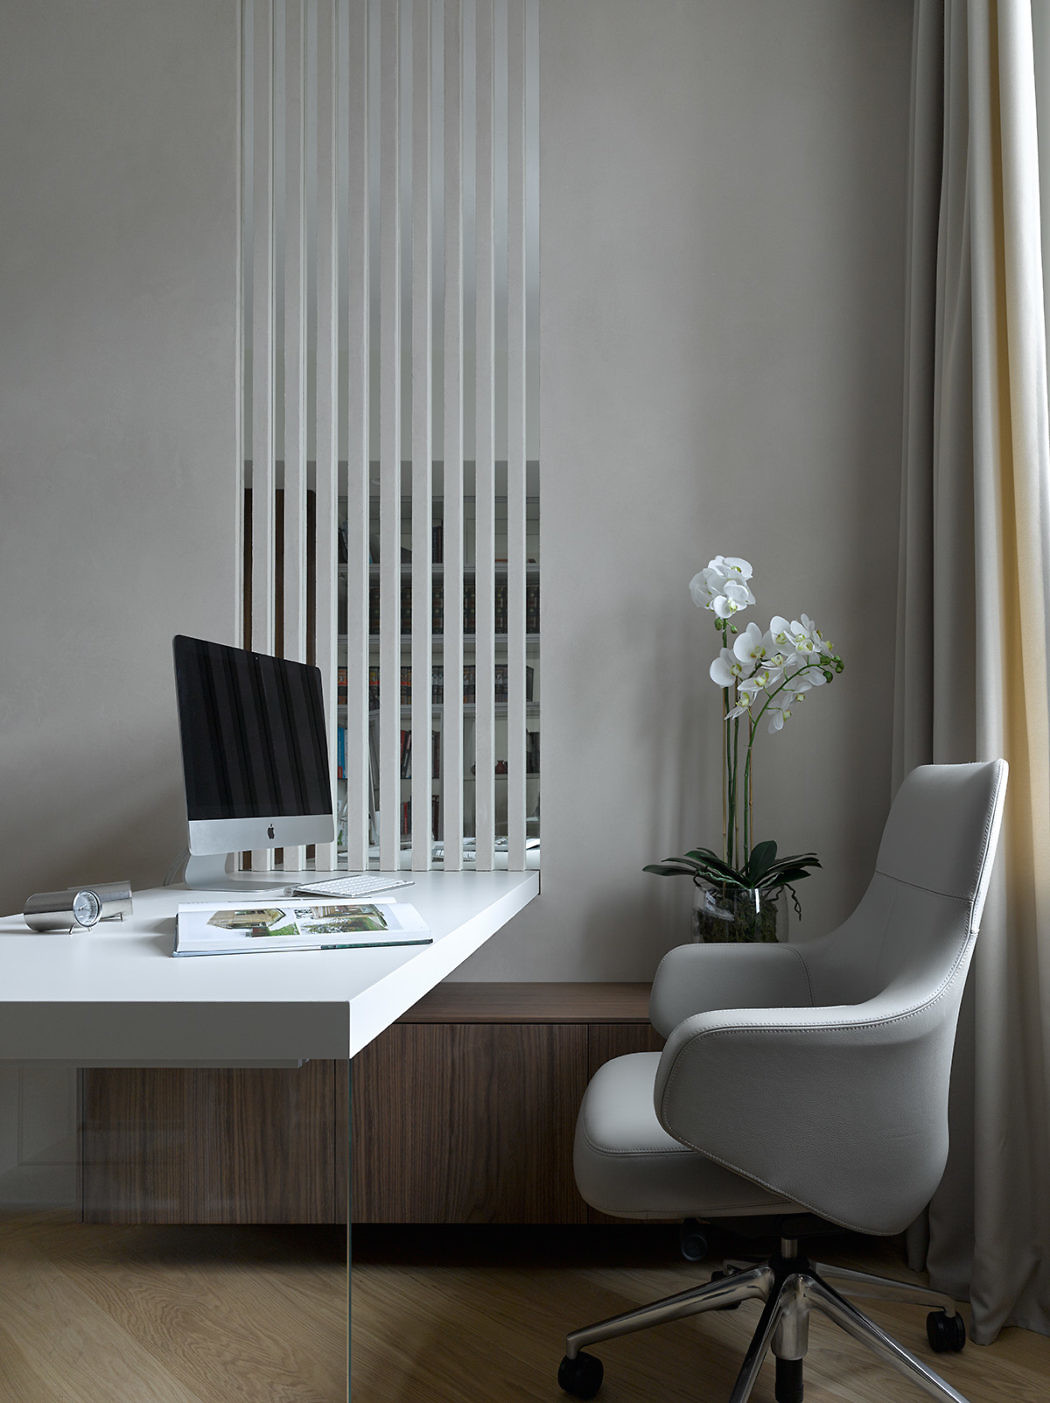 Minimalist home office with sleek desk and chair by a window with vertical blinds.